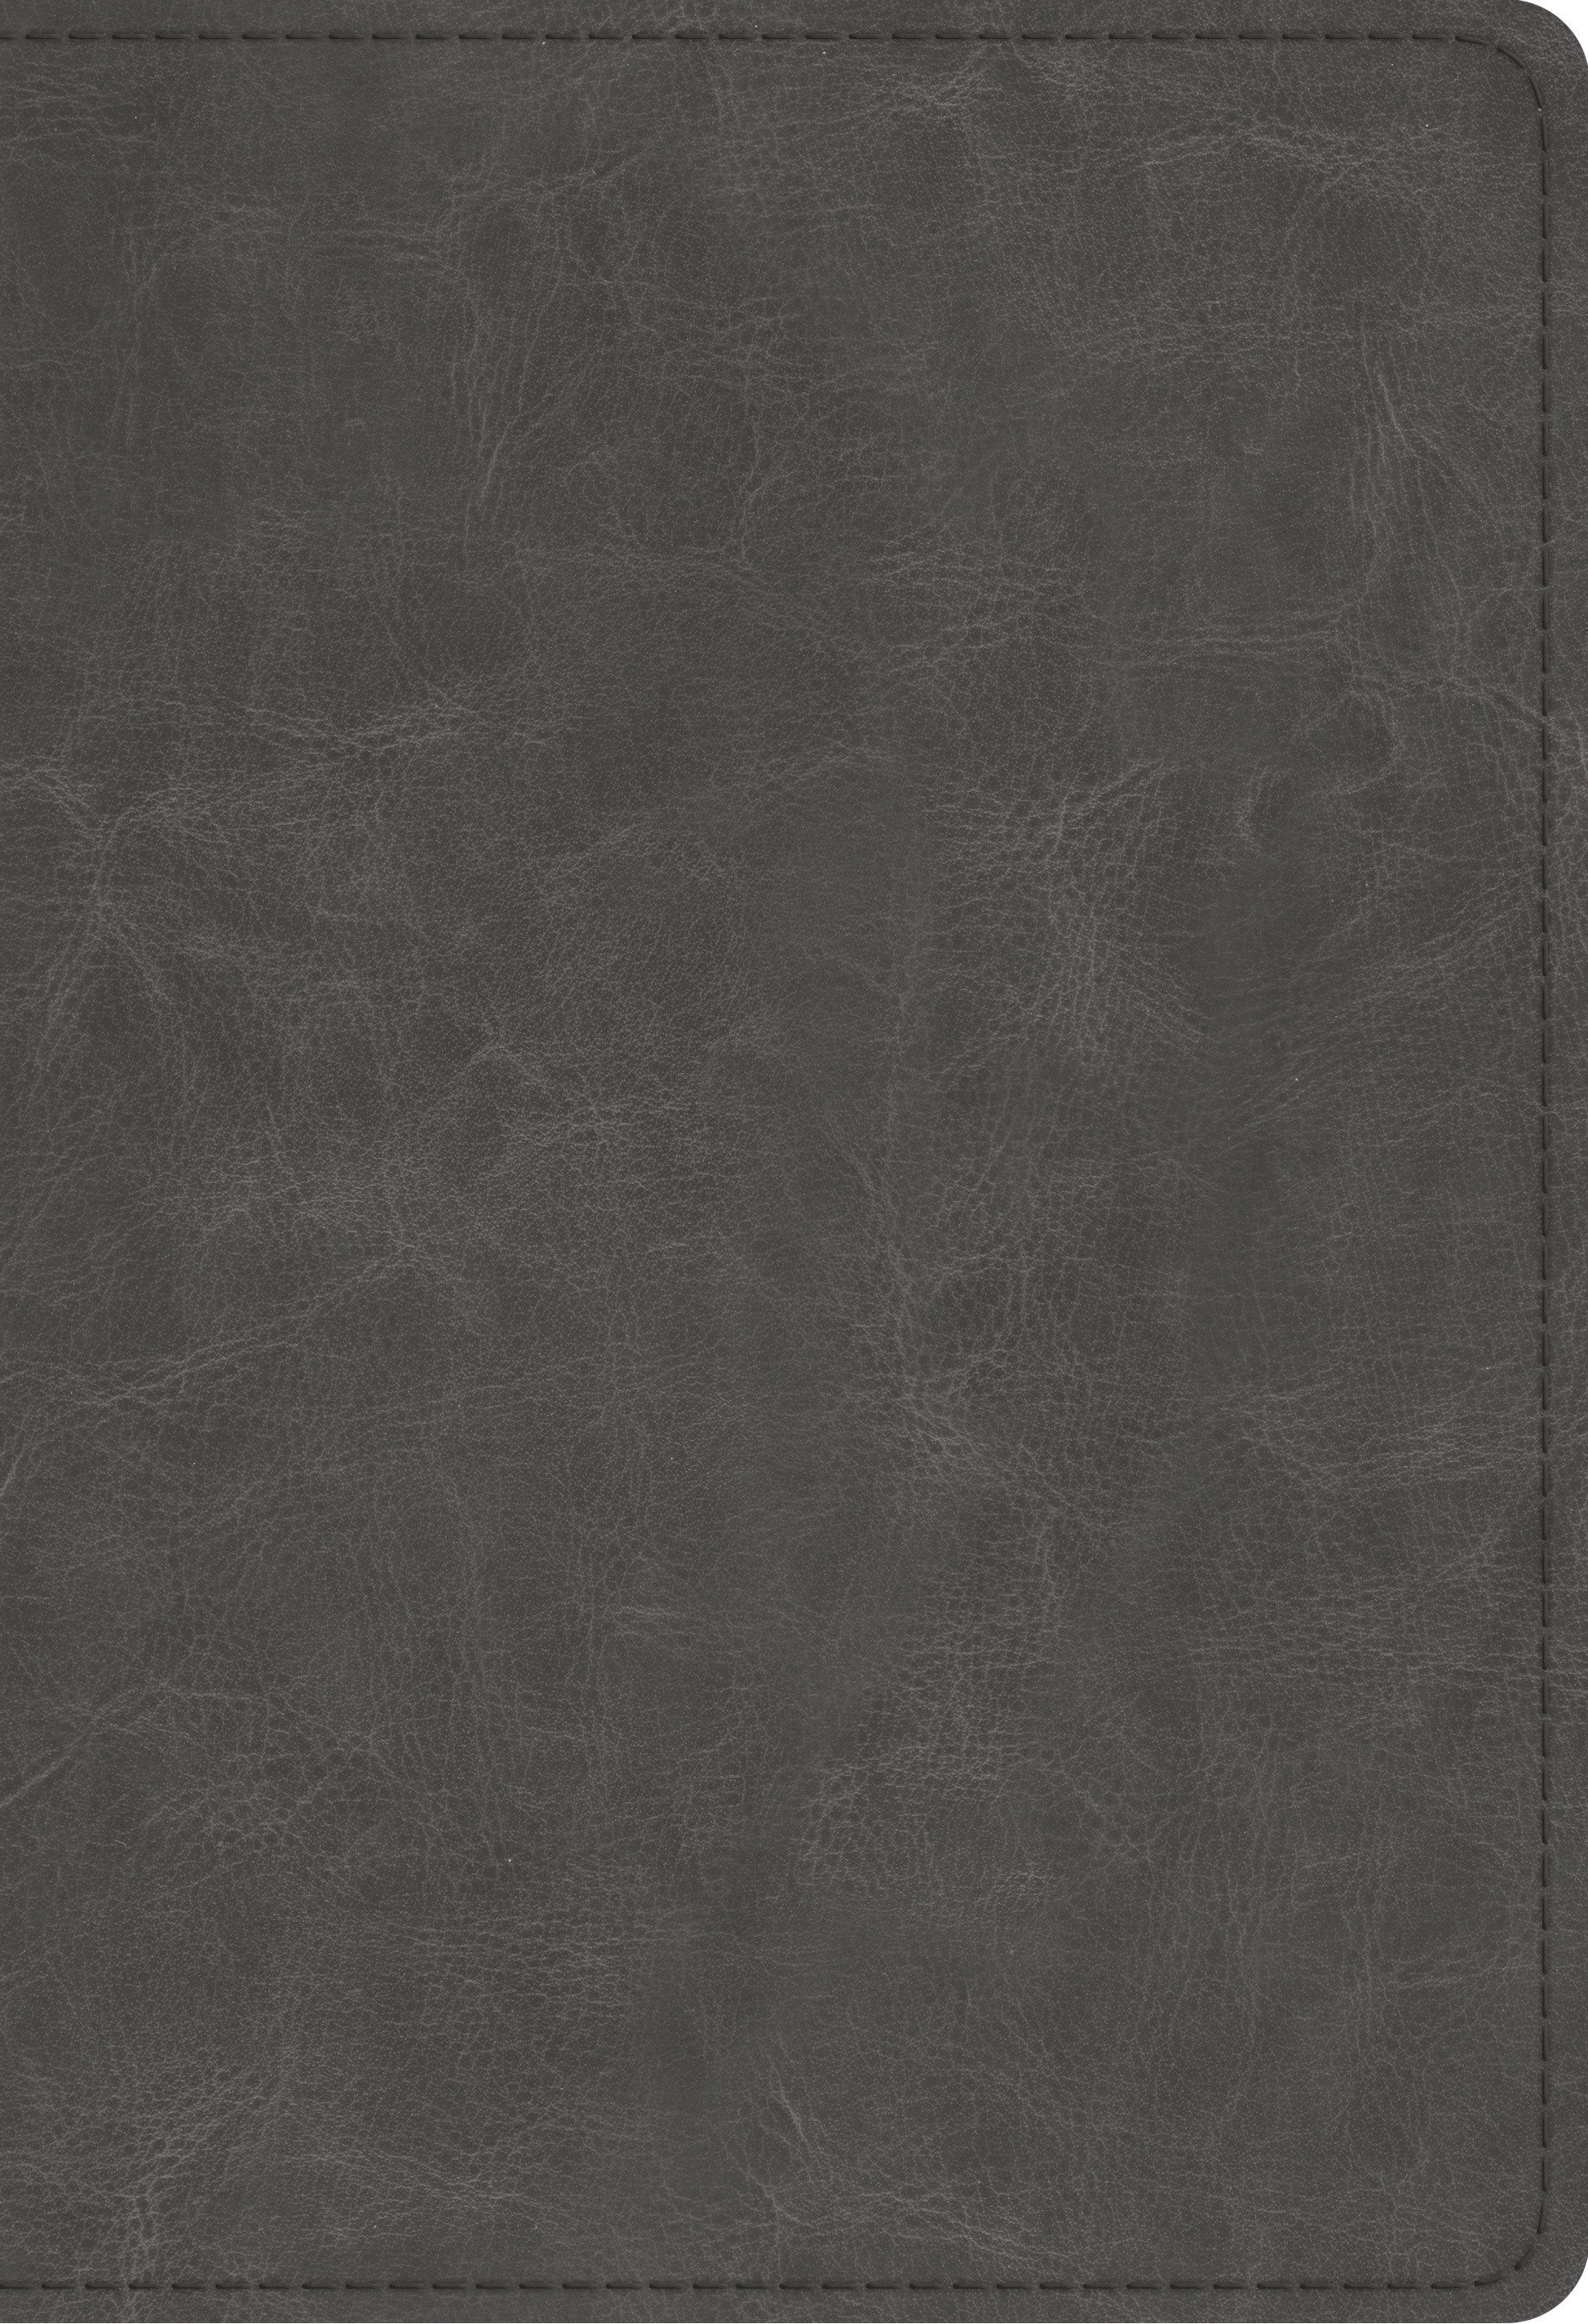 Image of ESV Student Study Bible, Imitation Leather, Gray, Study Notes, Concordance, Maps, Topical Articles other